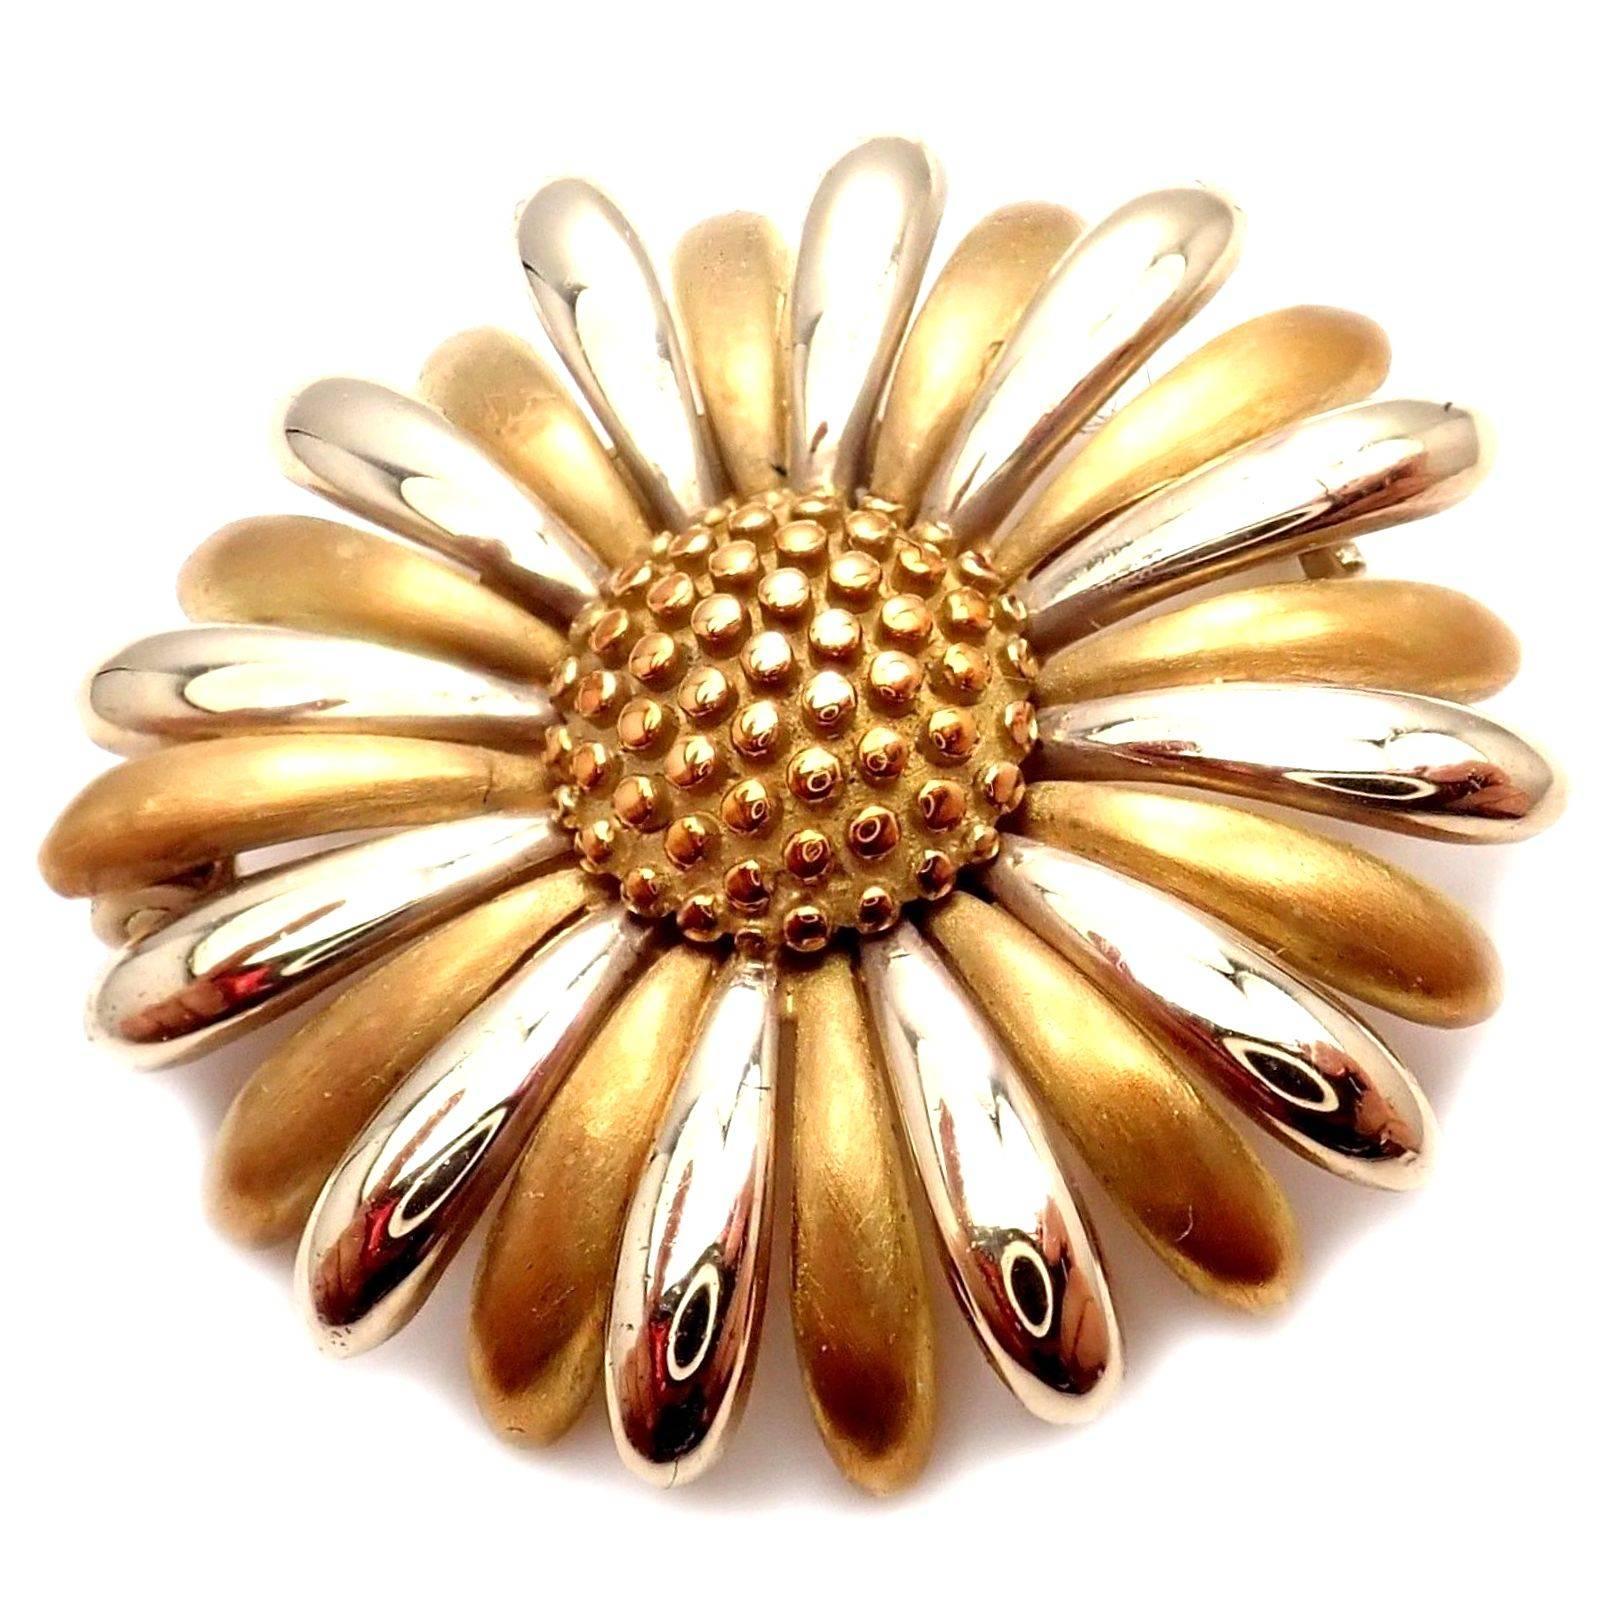 18k White And Yellow Gold Sunflower Pin Brooch by Asprey & Garrard London.
Includes Original Asprey & Garrard Box.
Details:
Measurements: 29mm
Weight: 10.8 grams
Stamped Hallmarks: Asprey 18k 
*Free Shipping within the United States*
YOUR PRICE: